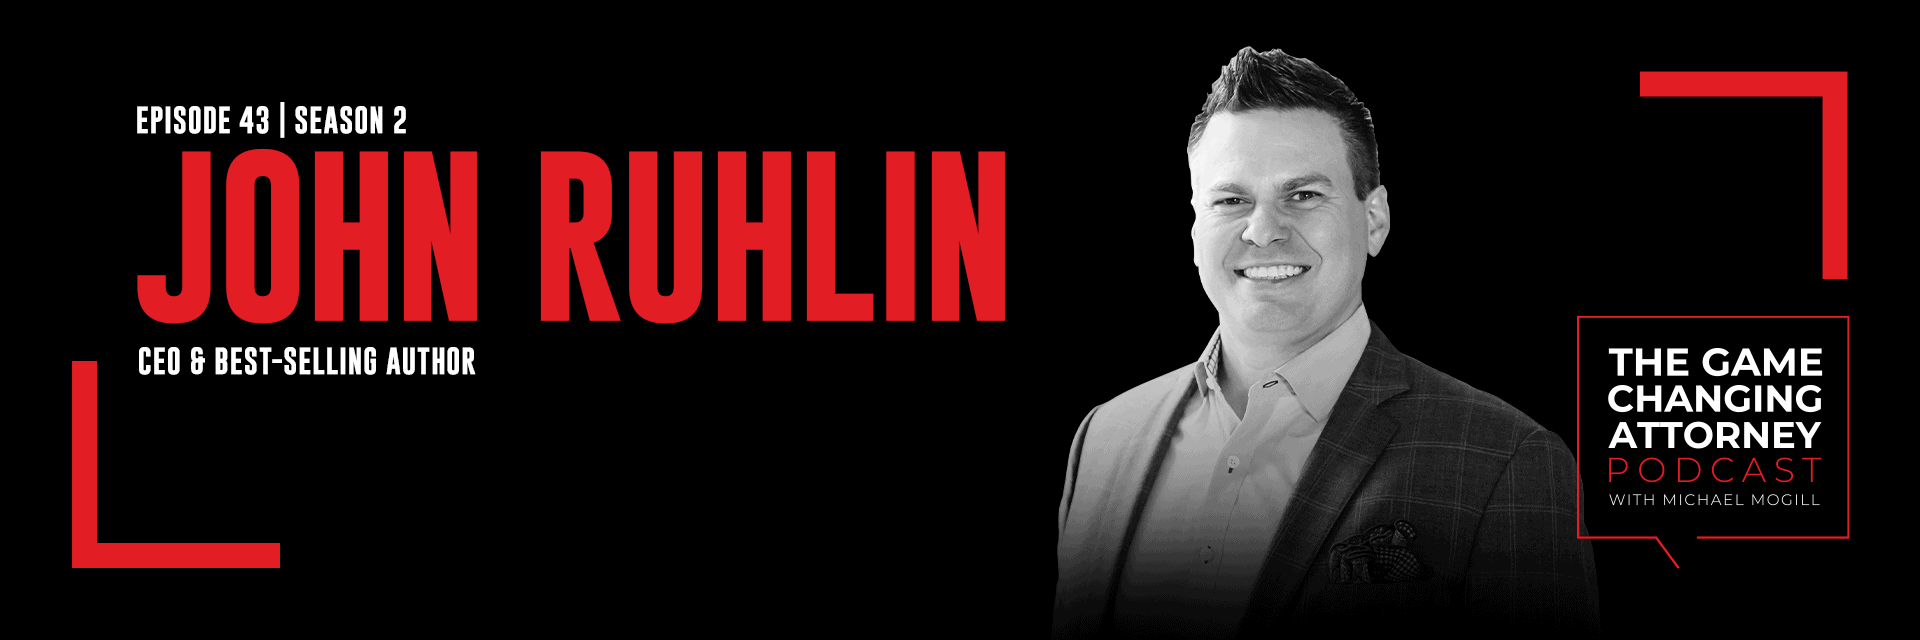 John Ruhlin - The Game Changing Attorney Podcast - Desktop